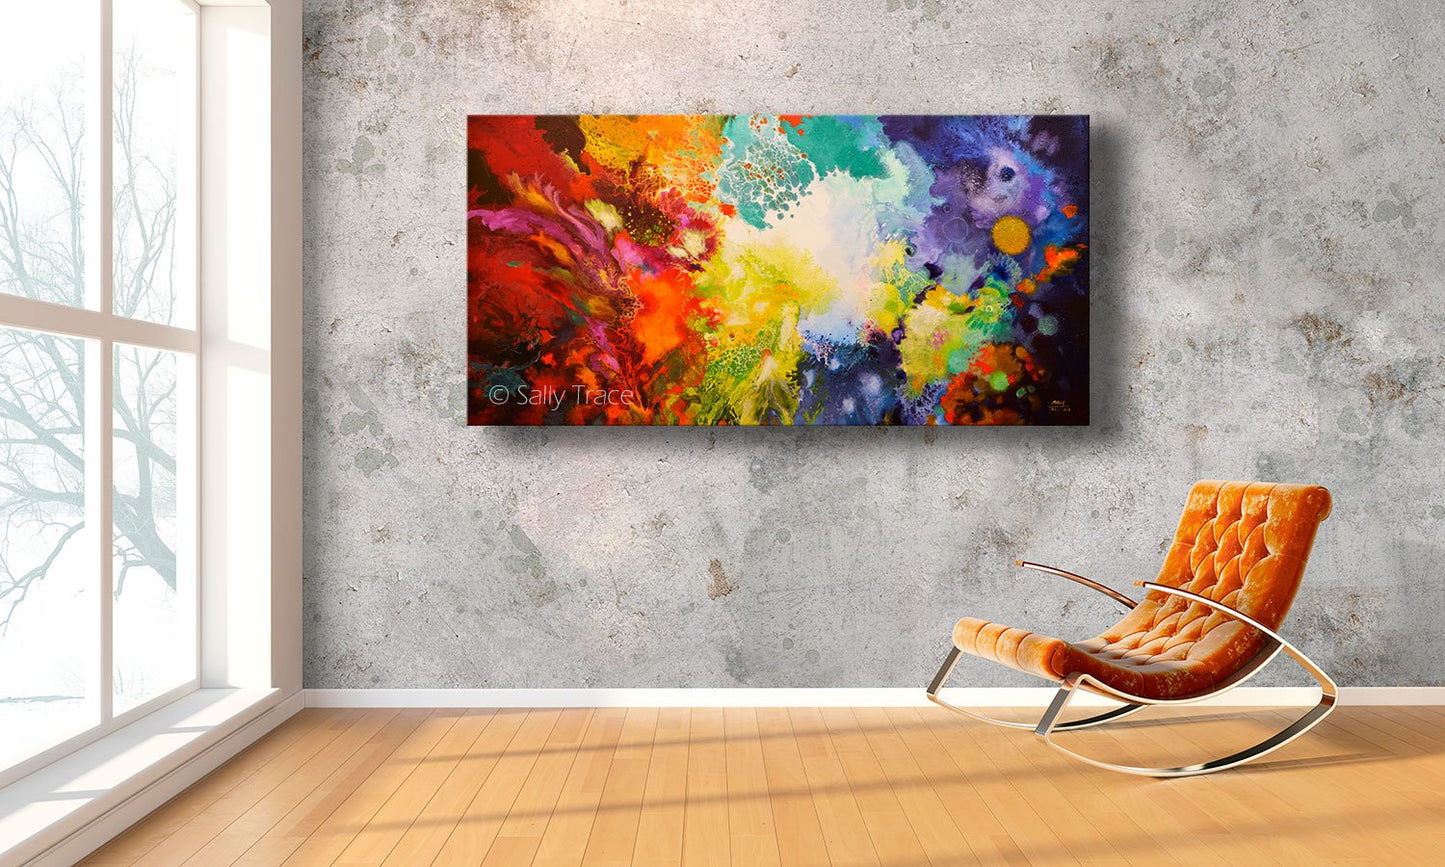 Harmonic Vibrations, fluid art giclee print for sale made from the original acrylic pour painting, room view, large abstract wall art for living room.